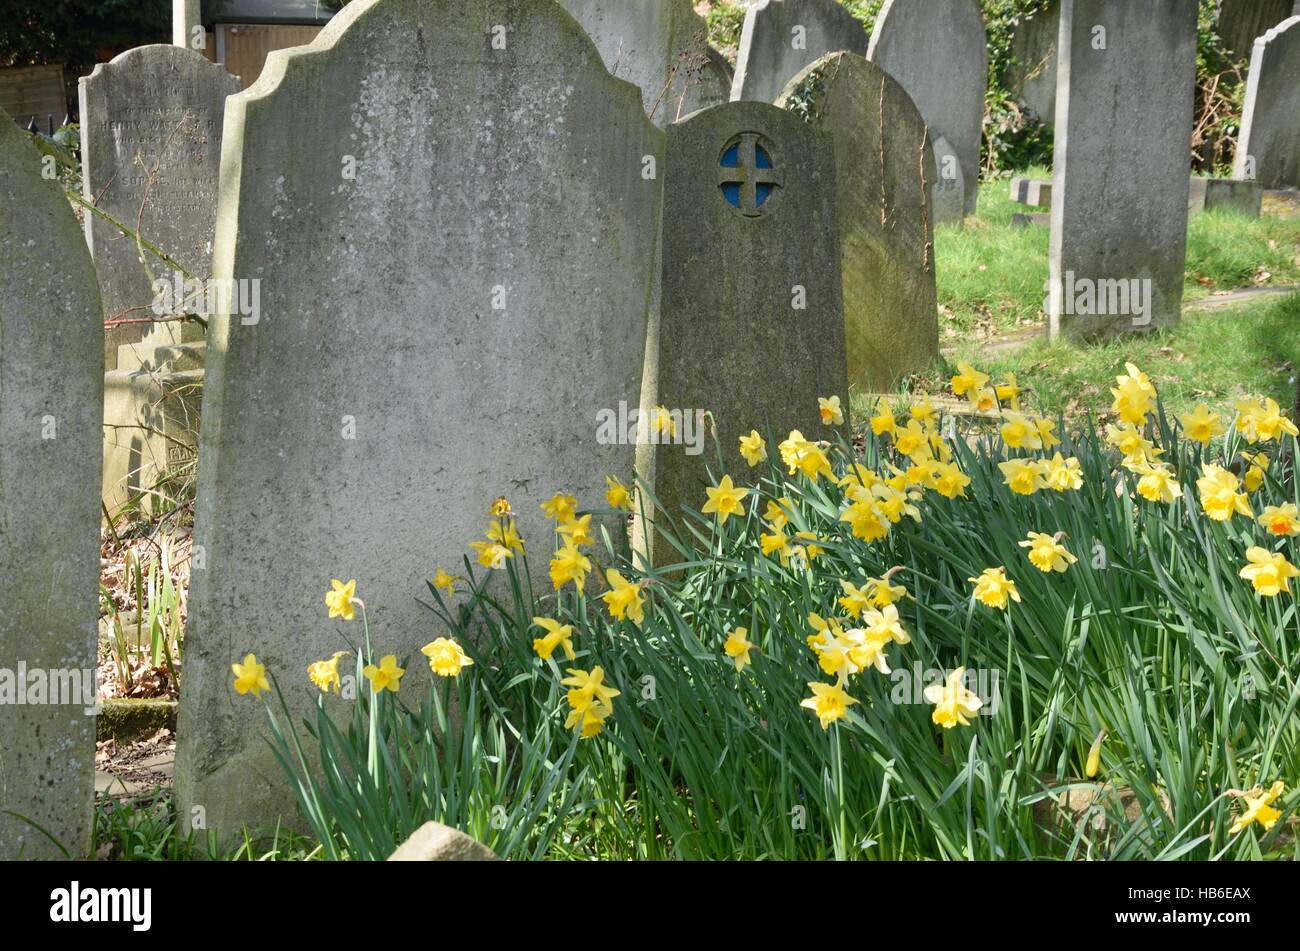 Graveyard with Daffodils Stock Photo